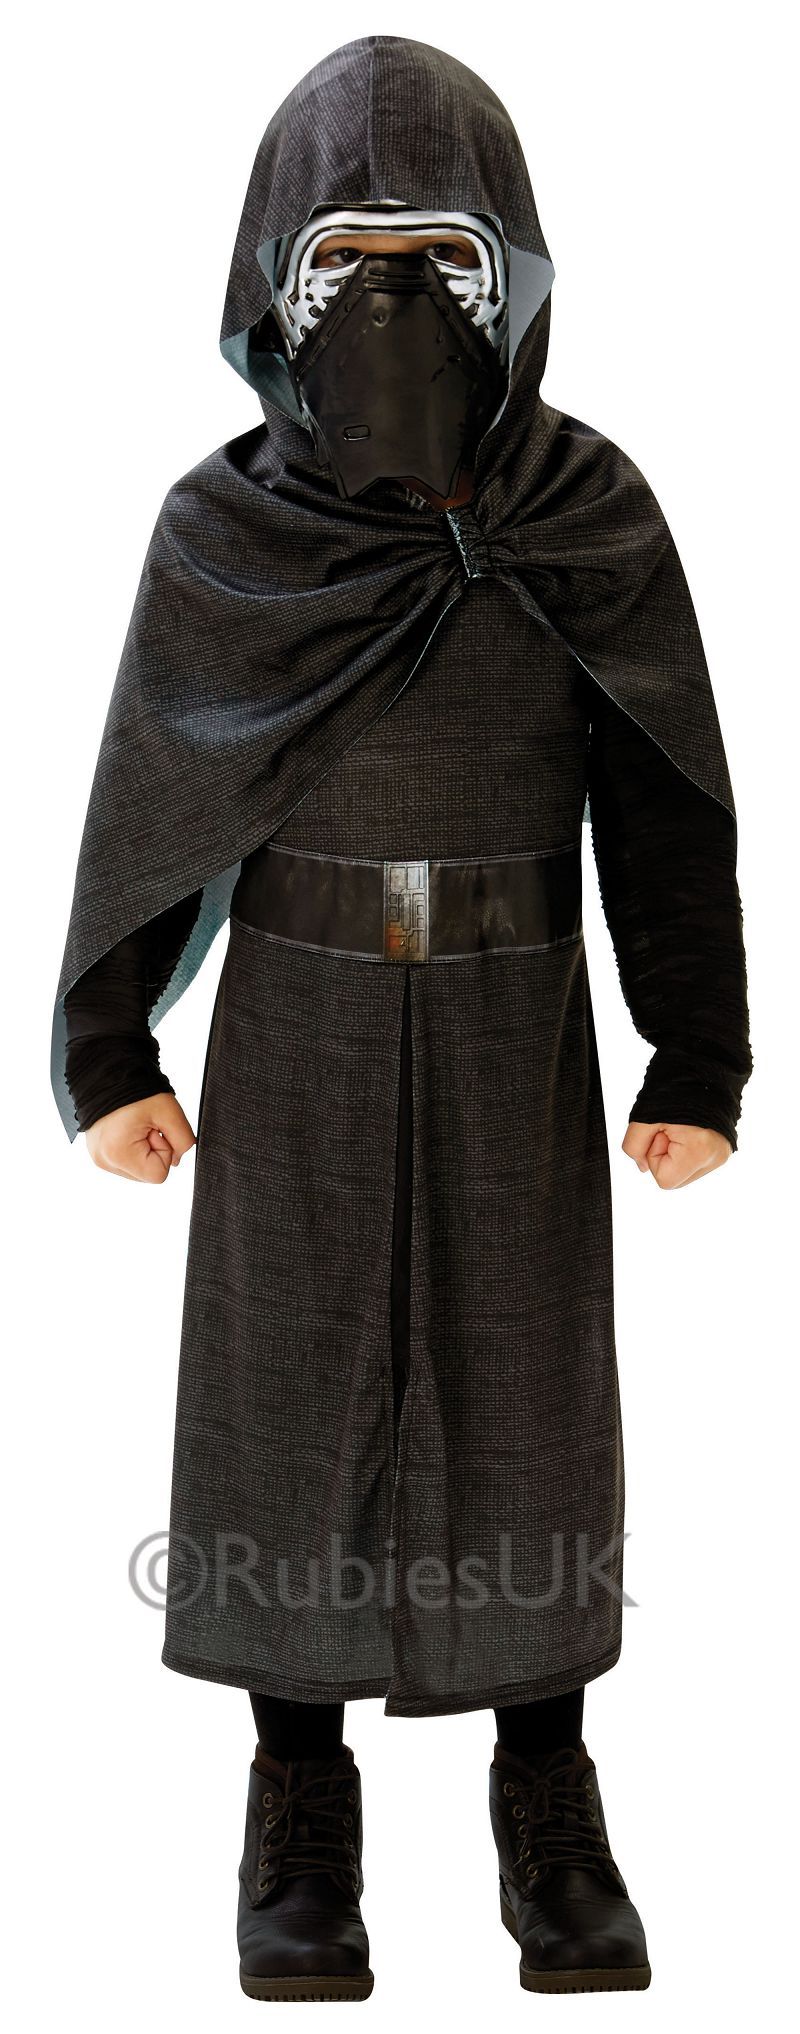 Kylo Ren Deluxe Medium Childrens Costumes Male Ages 5 6 Years_1 CC378